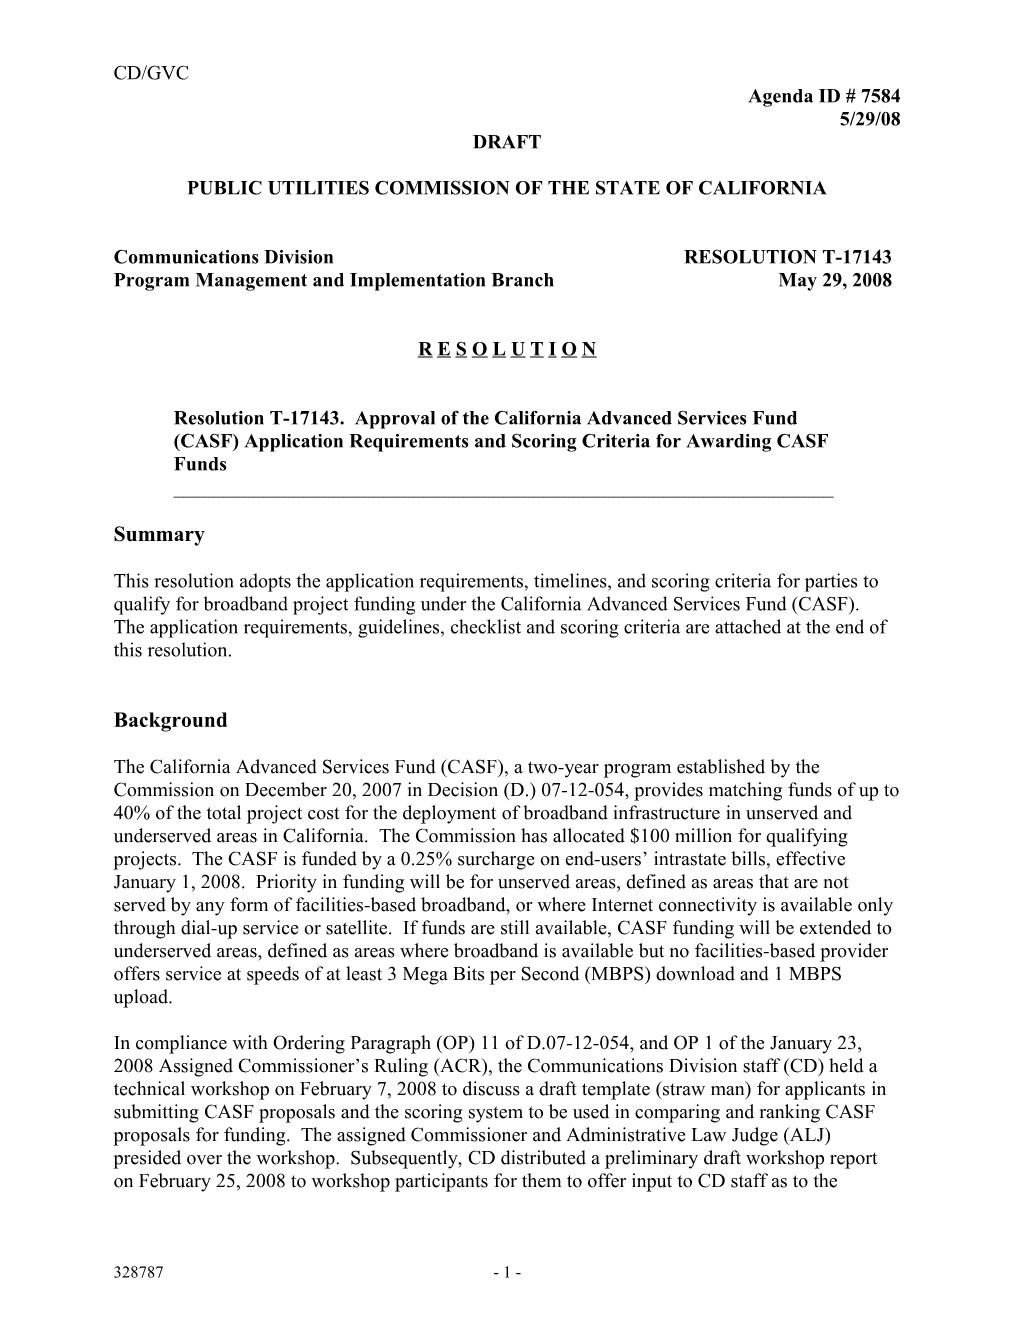 Public Utilities Commission of the State of California s136